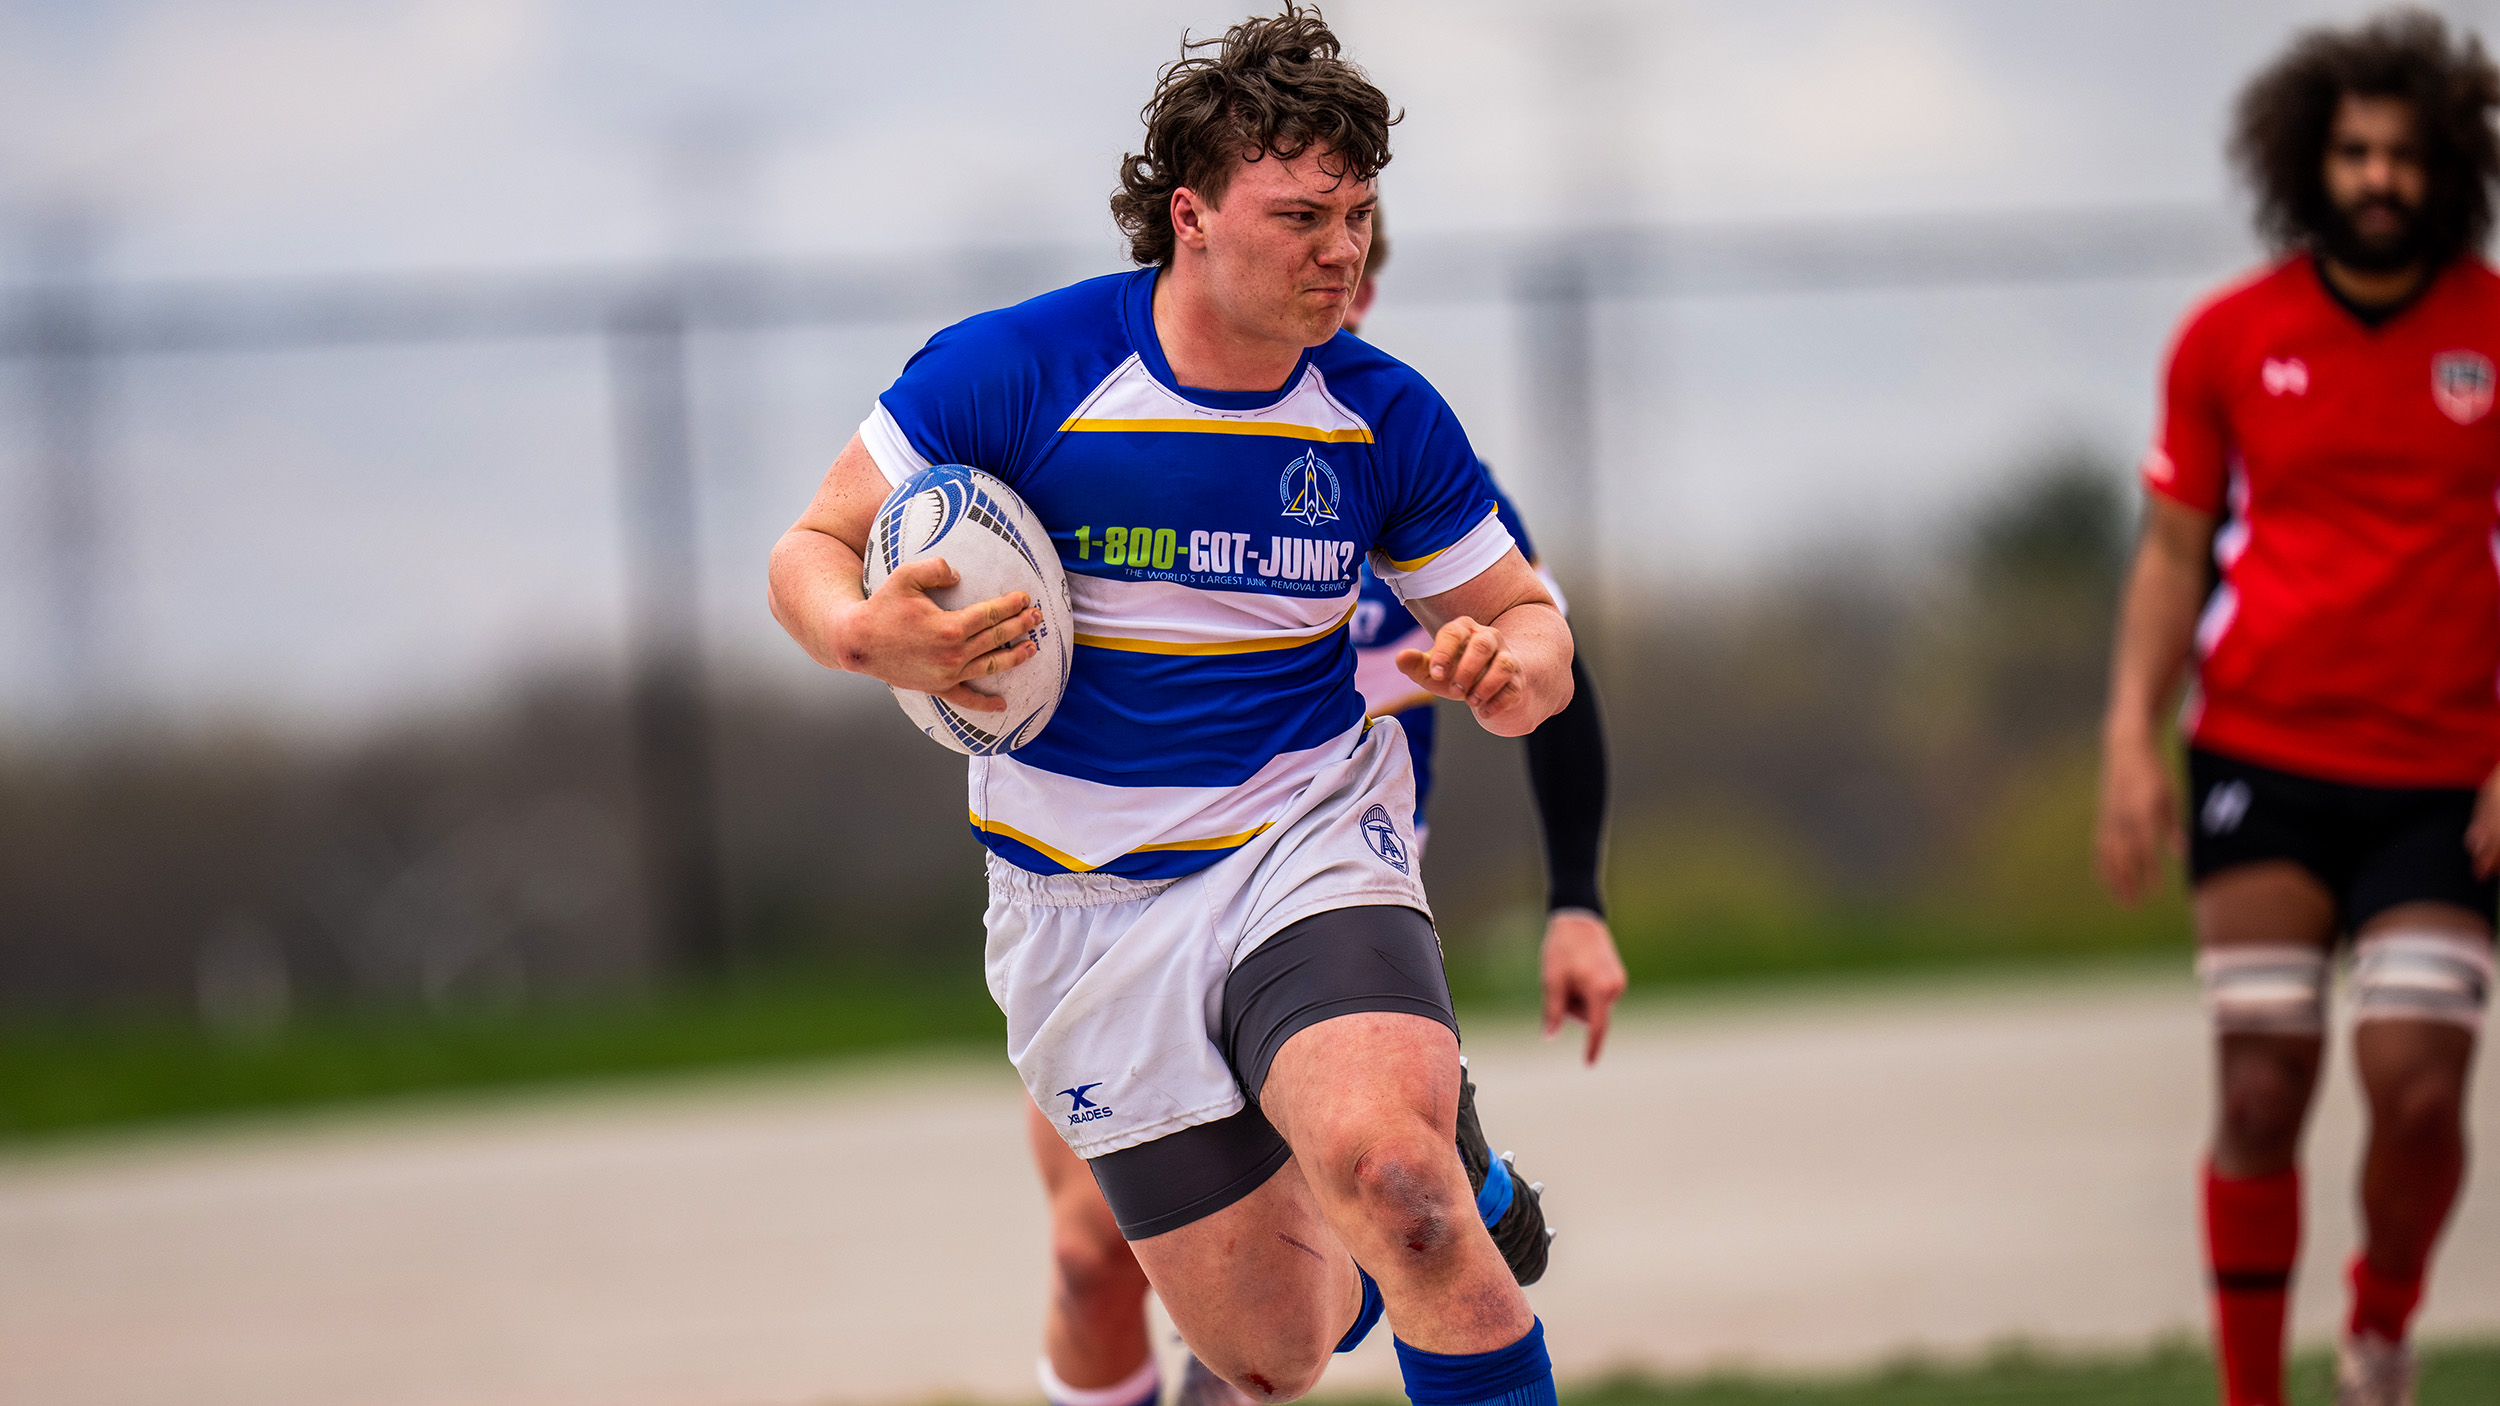 Twelve Arrows Academy Players Named to Canada’s World Rugby U20 Trophy Qualifier Roster